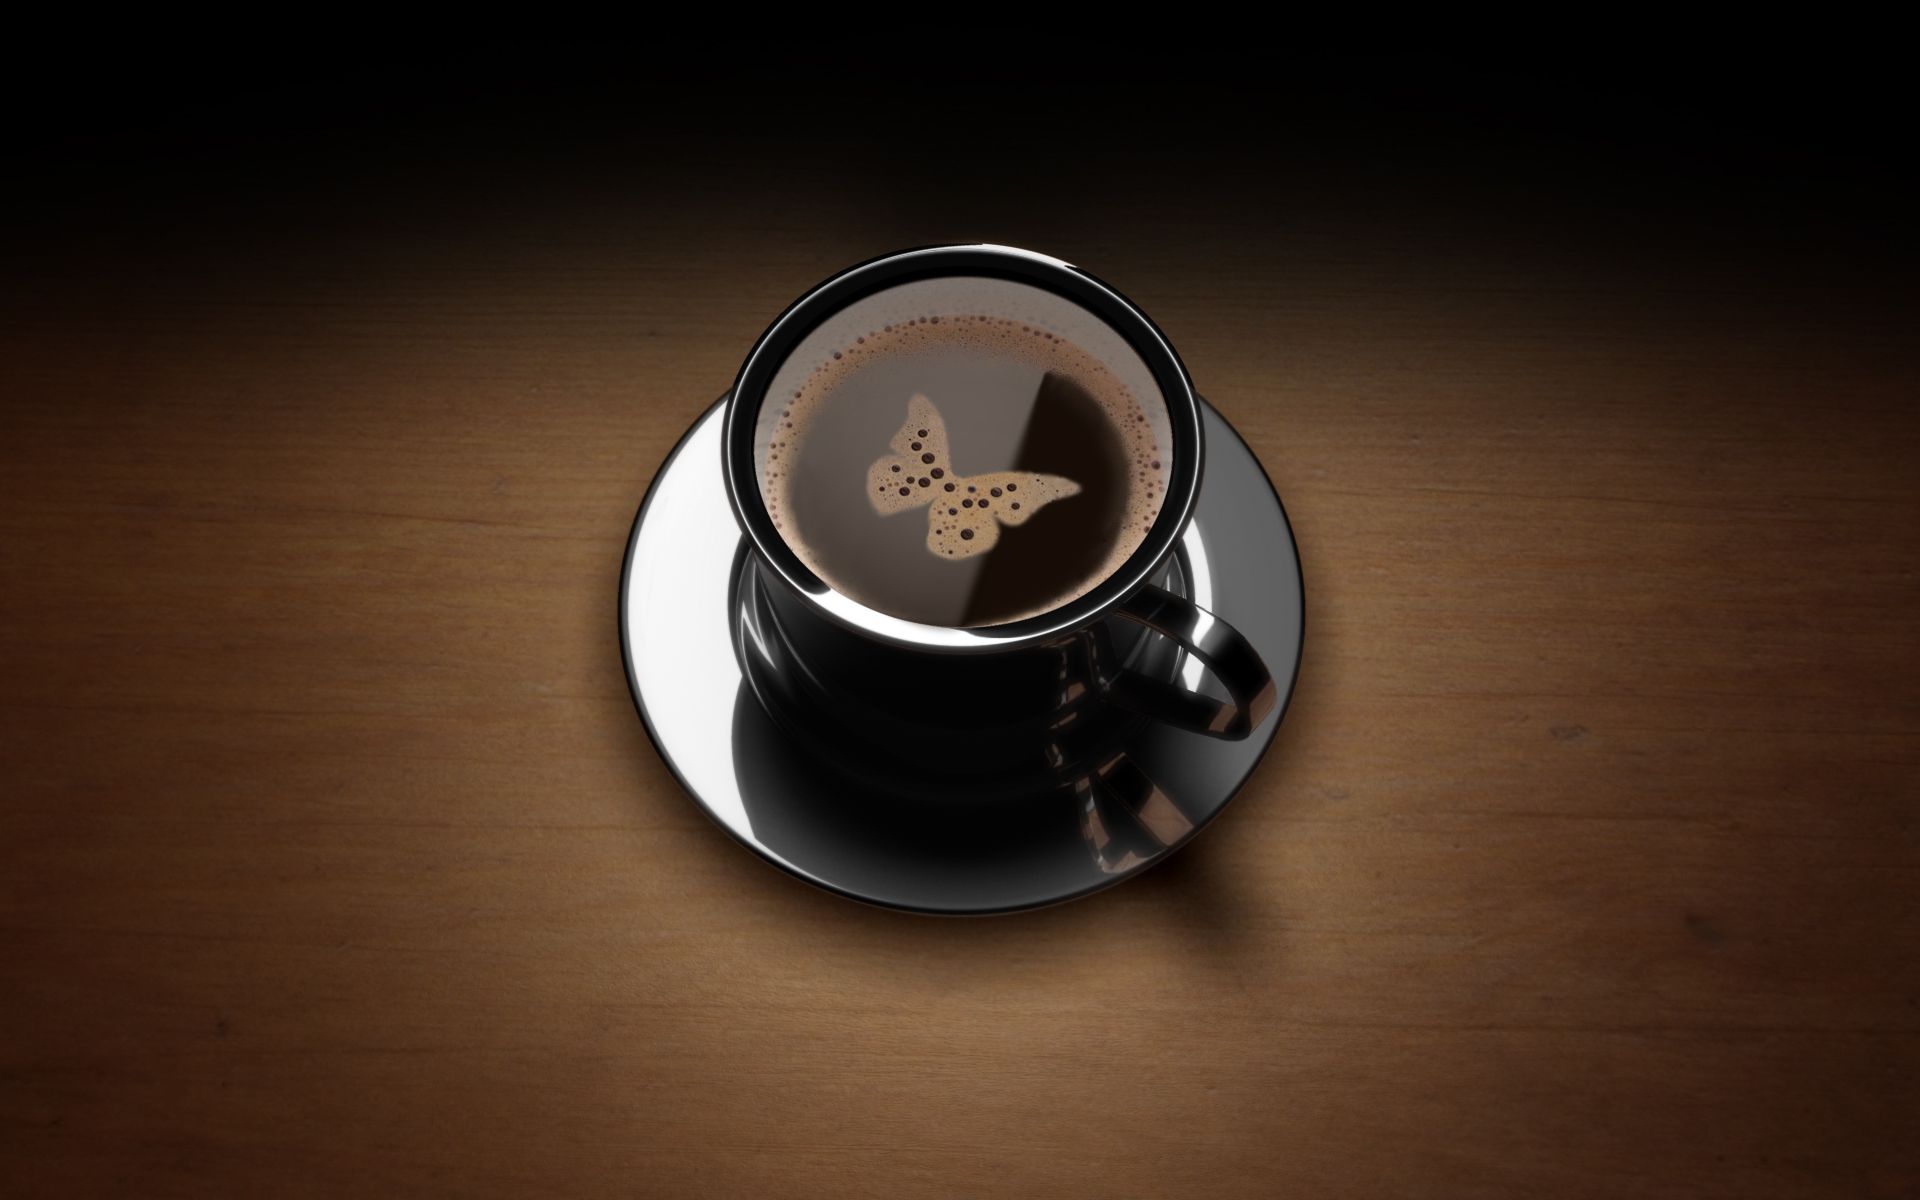 737 Coffee HD Wallpapers Backgrounds - Wallpaper Abyss